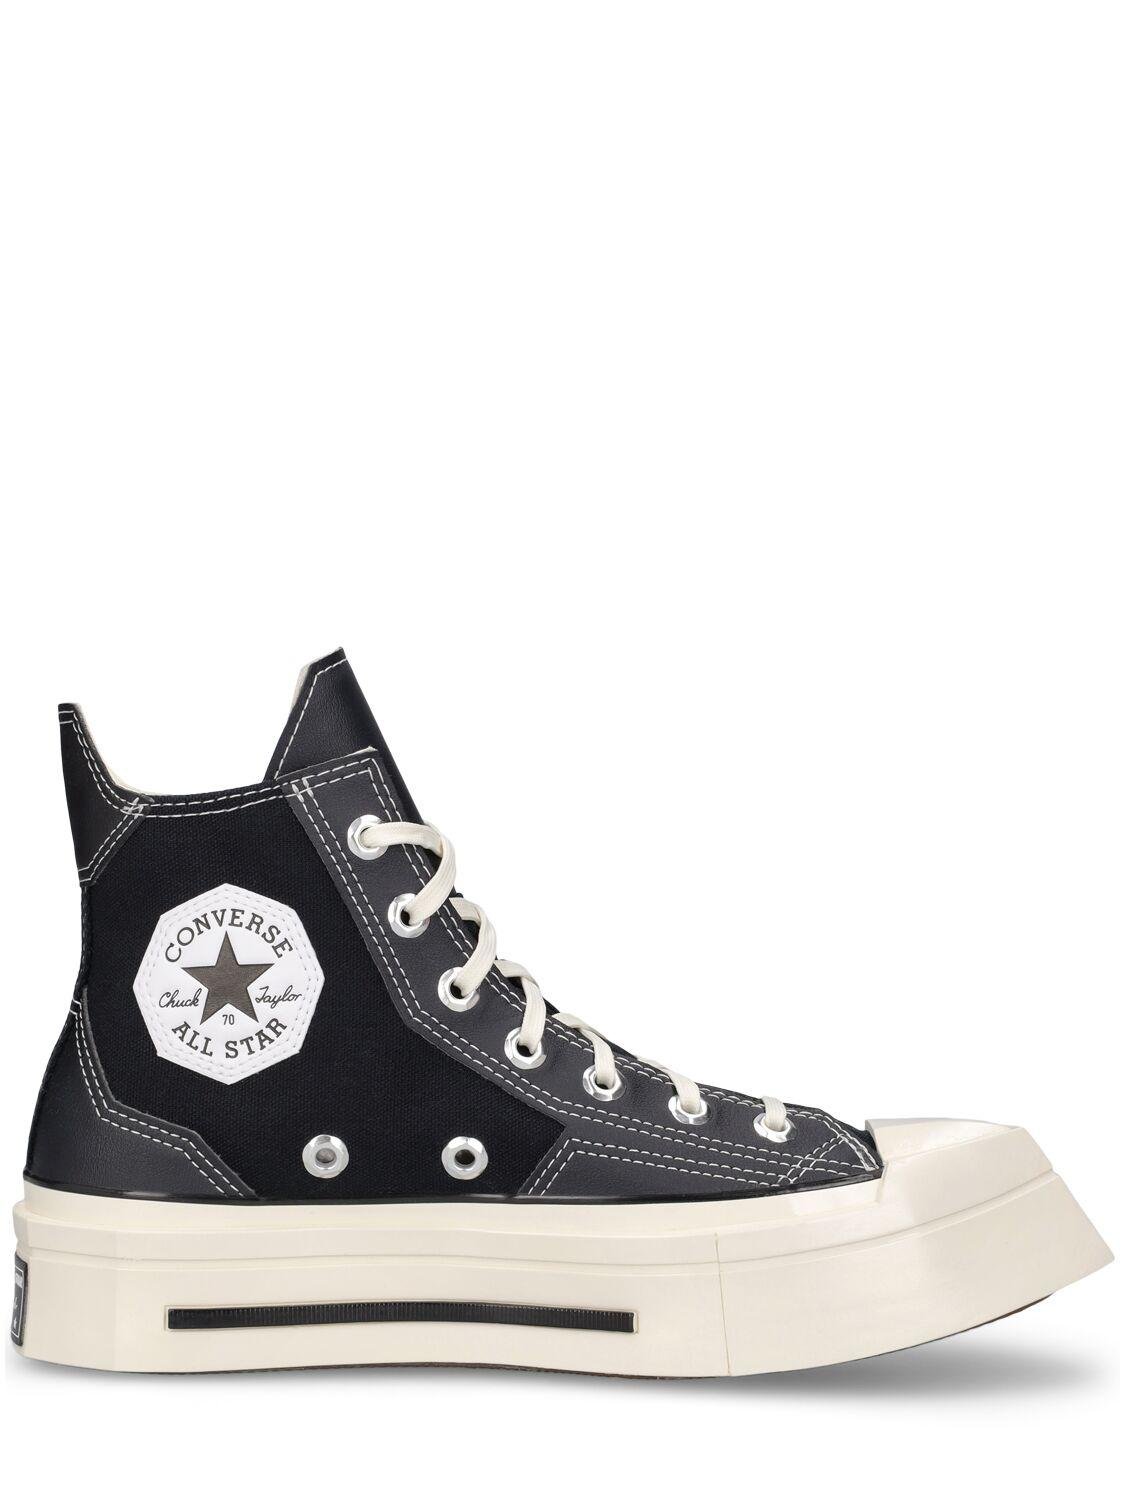 Chuck 70 De Luxe Squared Sneakers by CONVERSE